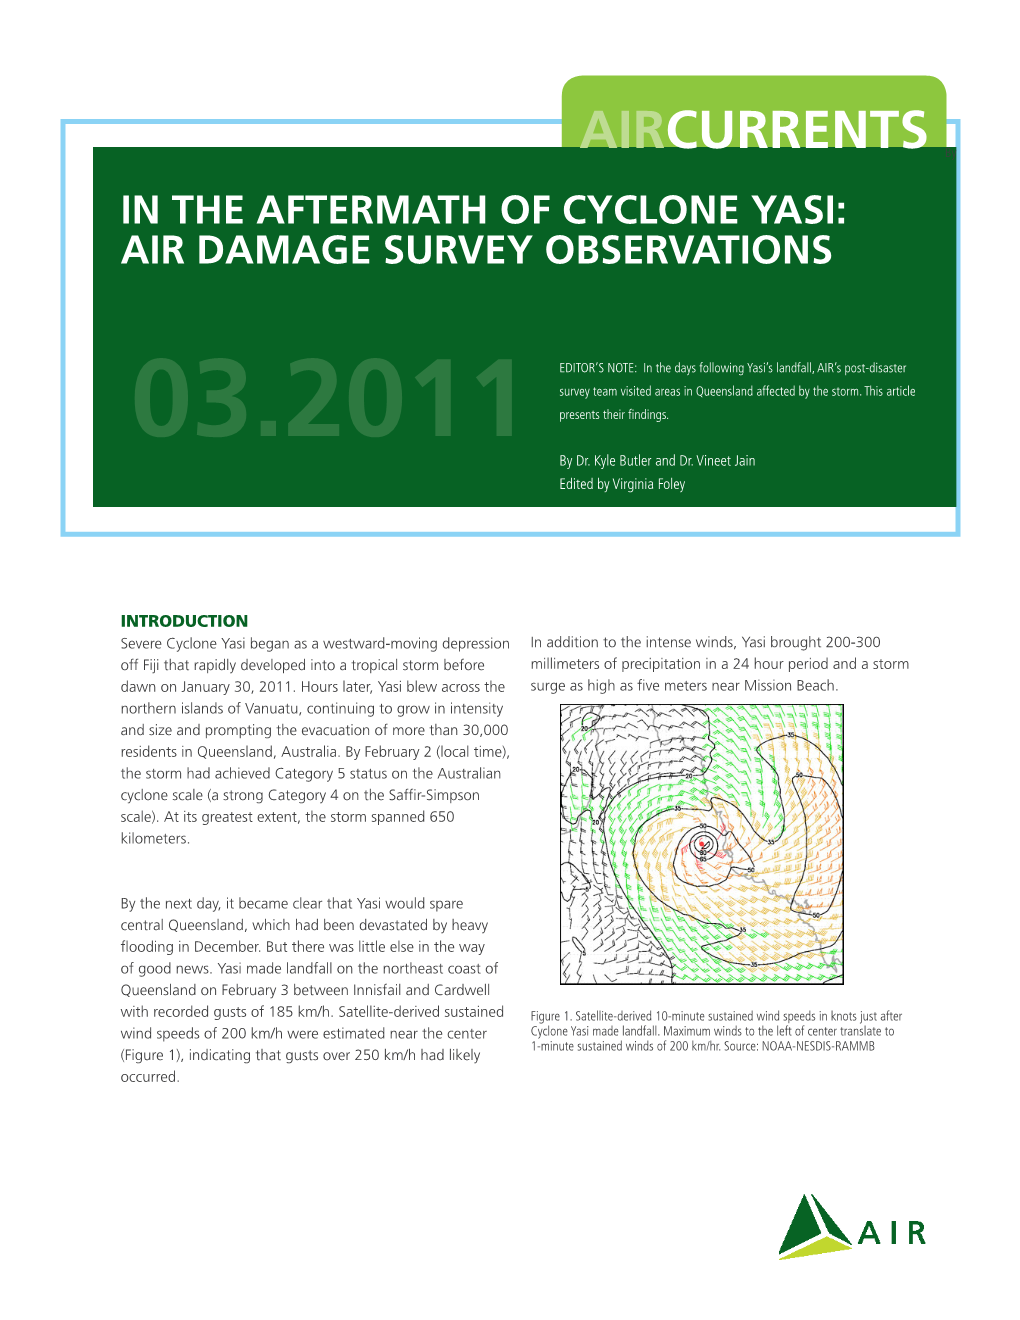 In the Aftermath of Cyclone Yasi: AIR Damage Survey Observations